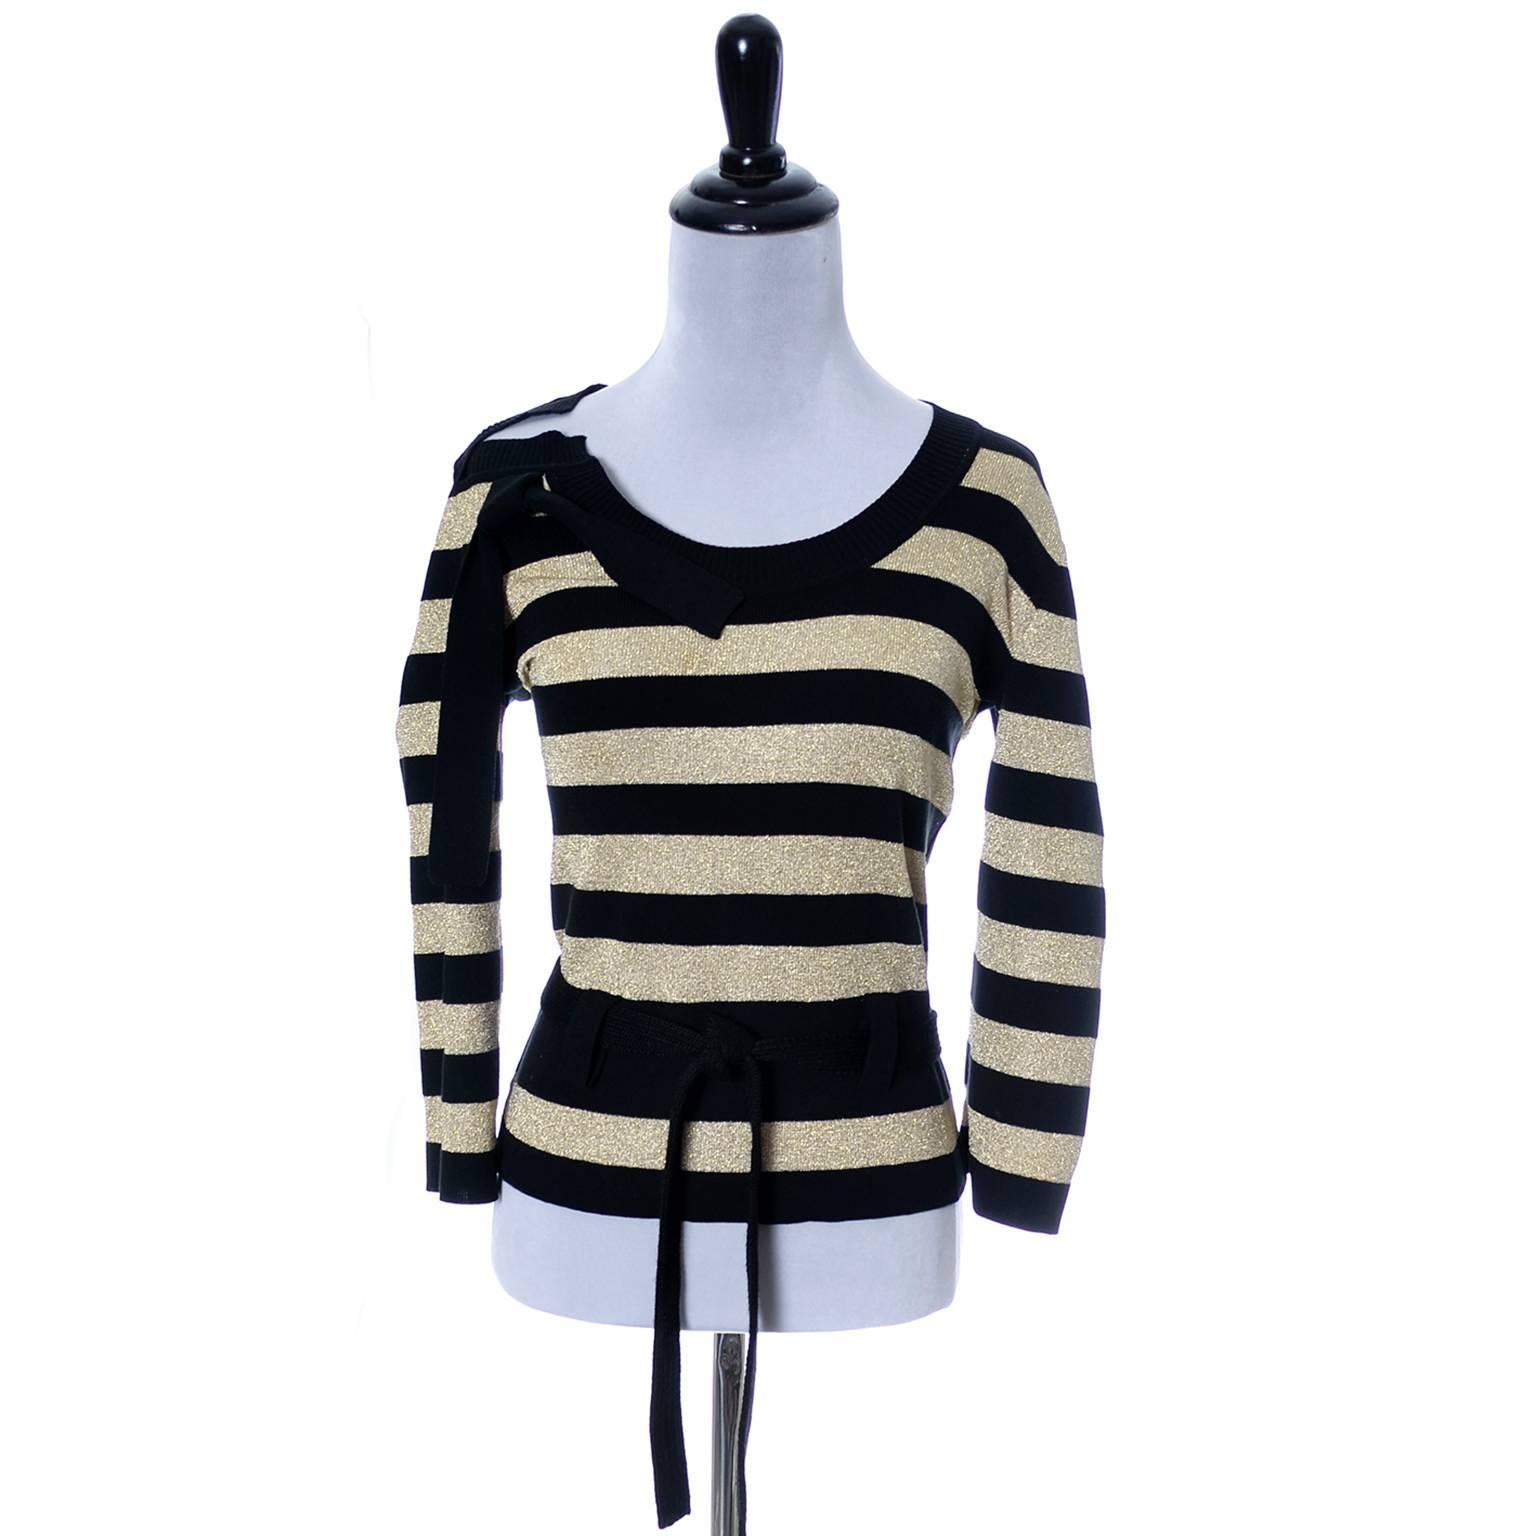 This is a great vintage top in as new condition from Sonia Rykiel from the 1980's.  This pretty sweater has alternating stripes of black knit and gold sparkle knit, a knit belt and a pretty knit bow at the shoulder. The fabric is a blend of cotton,